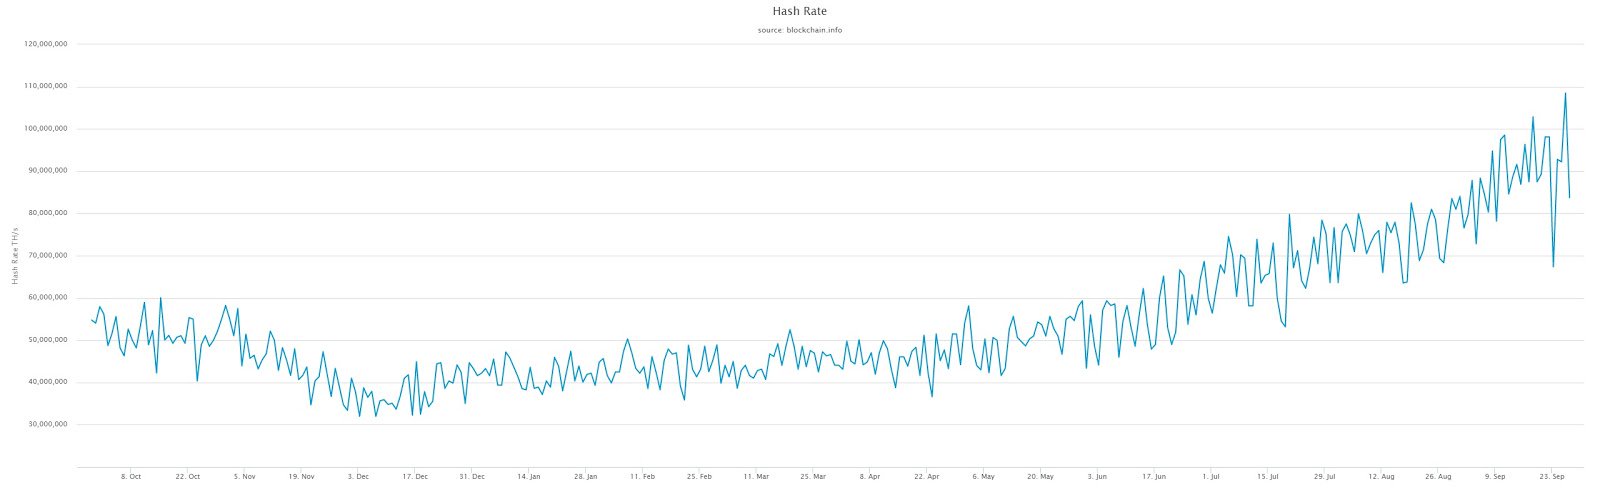 Caption: The Bitcoin hash rate fully recovered after a 30% dip